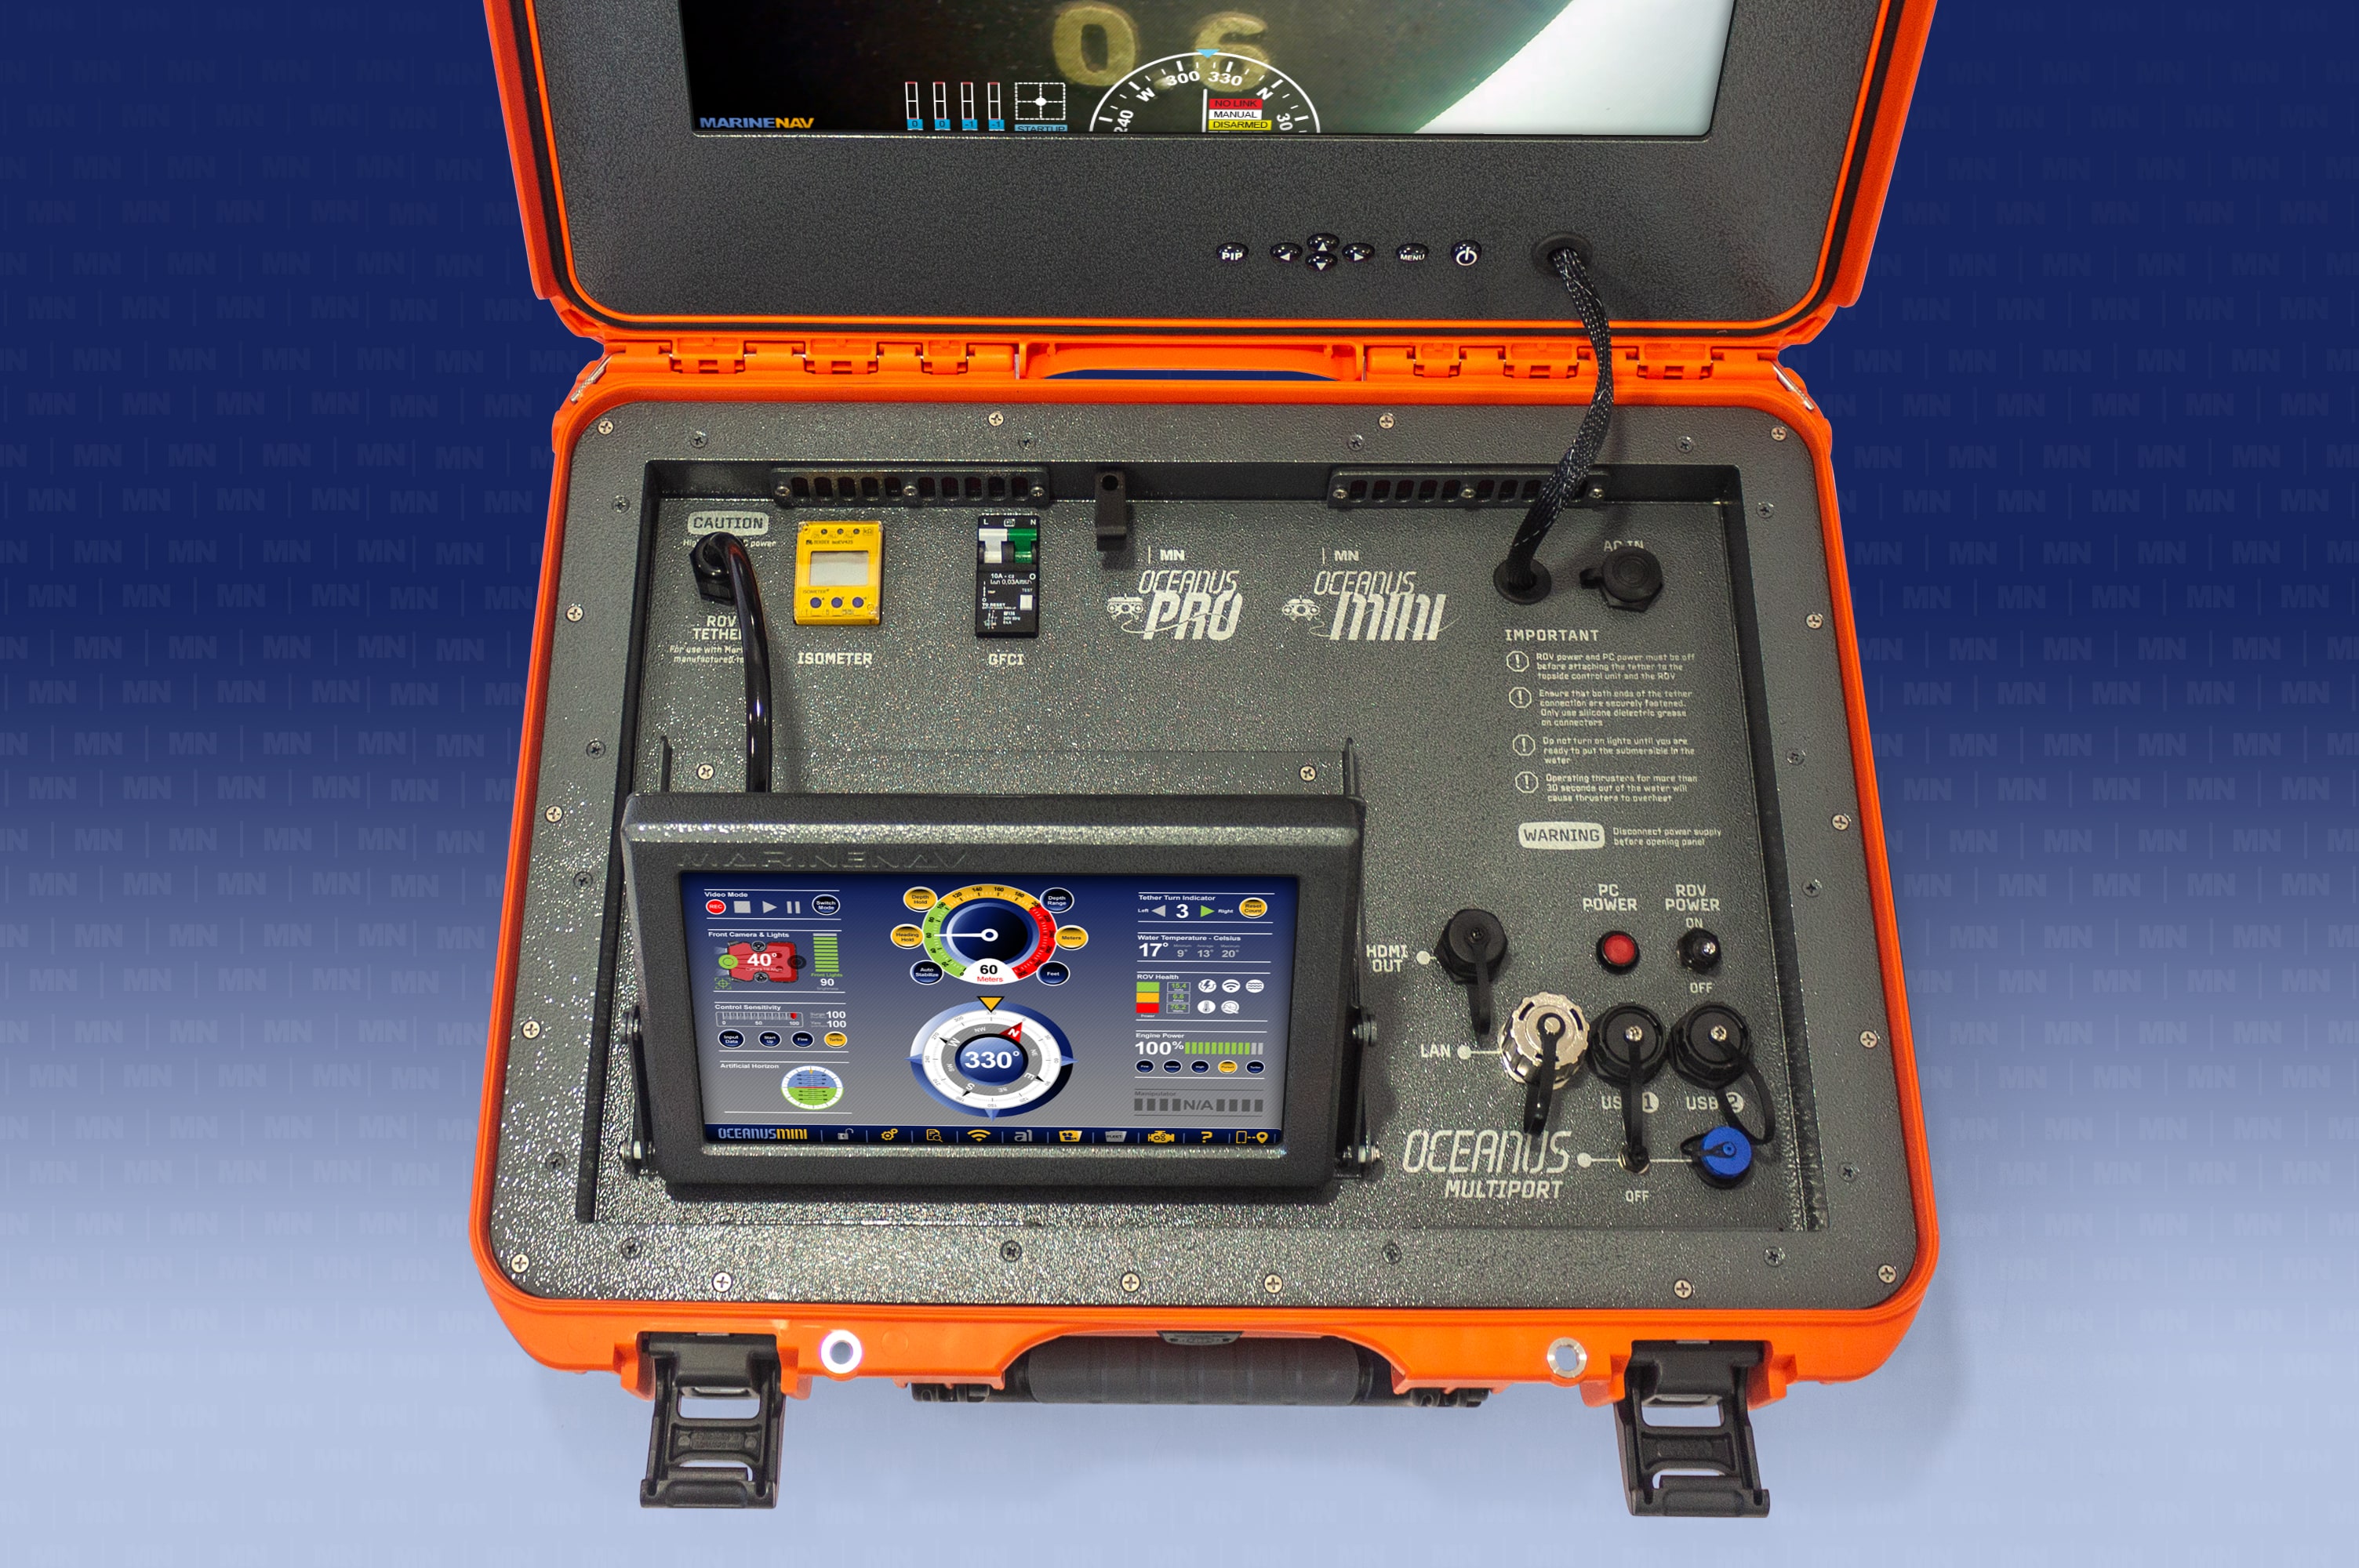 The Oceanus Mini/Pro topside control case is the operation hub of the Pro ROV system.